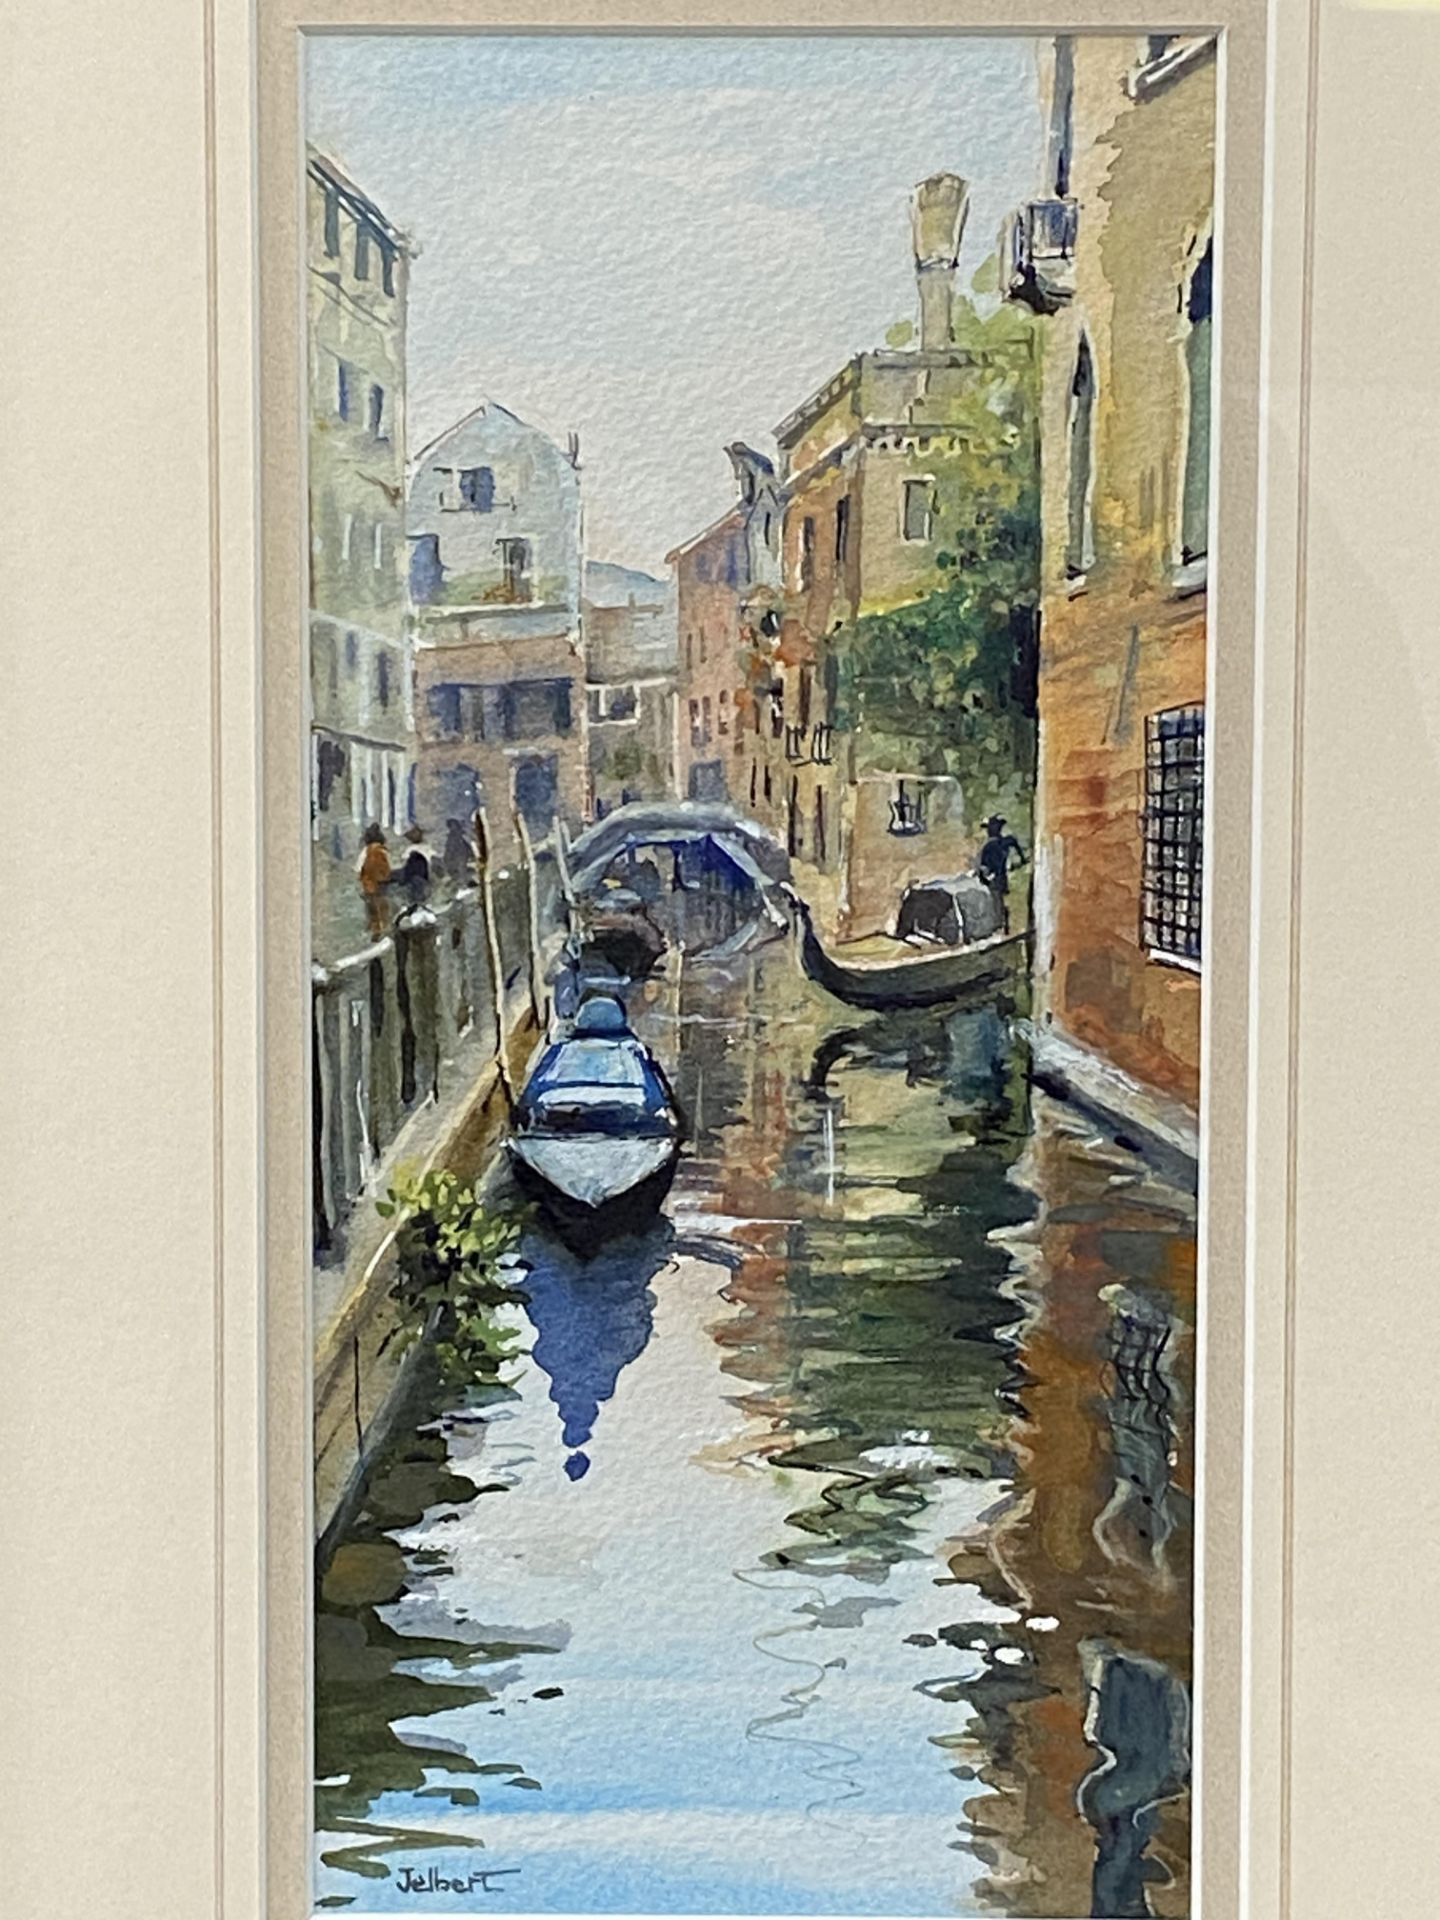 Framed and glazed watercolour "Venice Canal" by Wendy Jelbert - Image 2 of 3